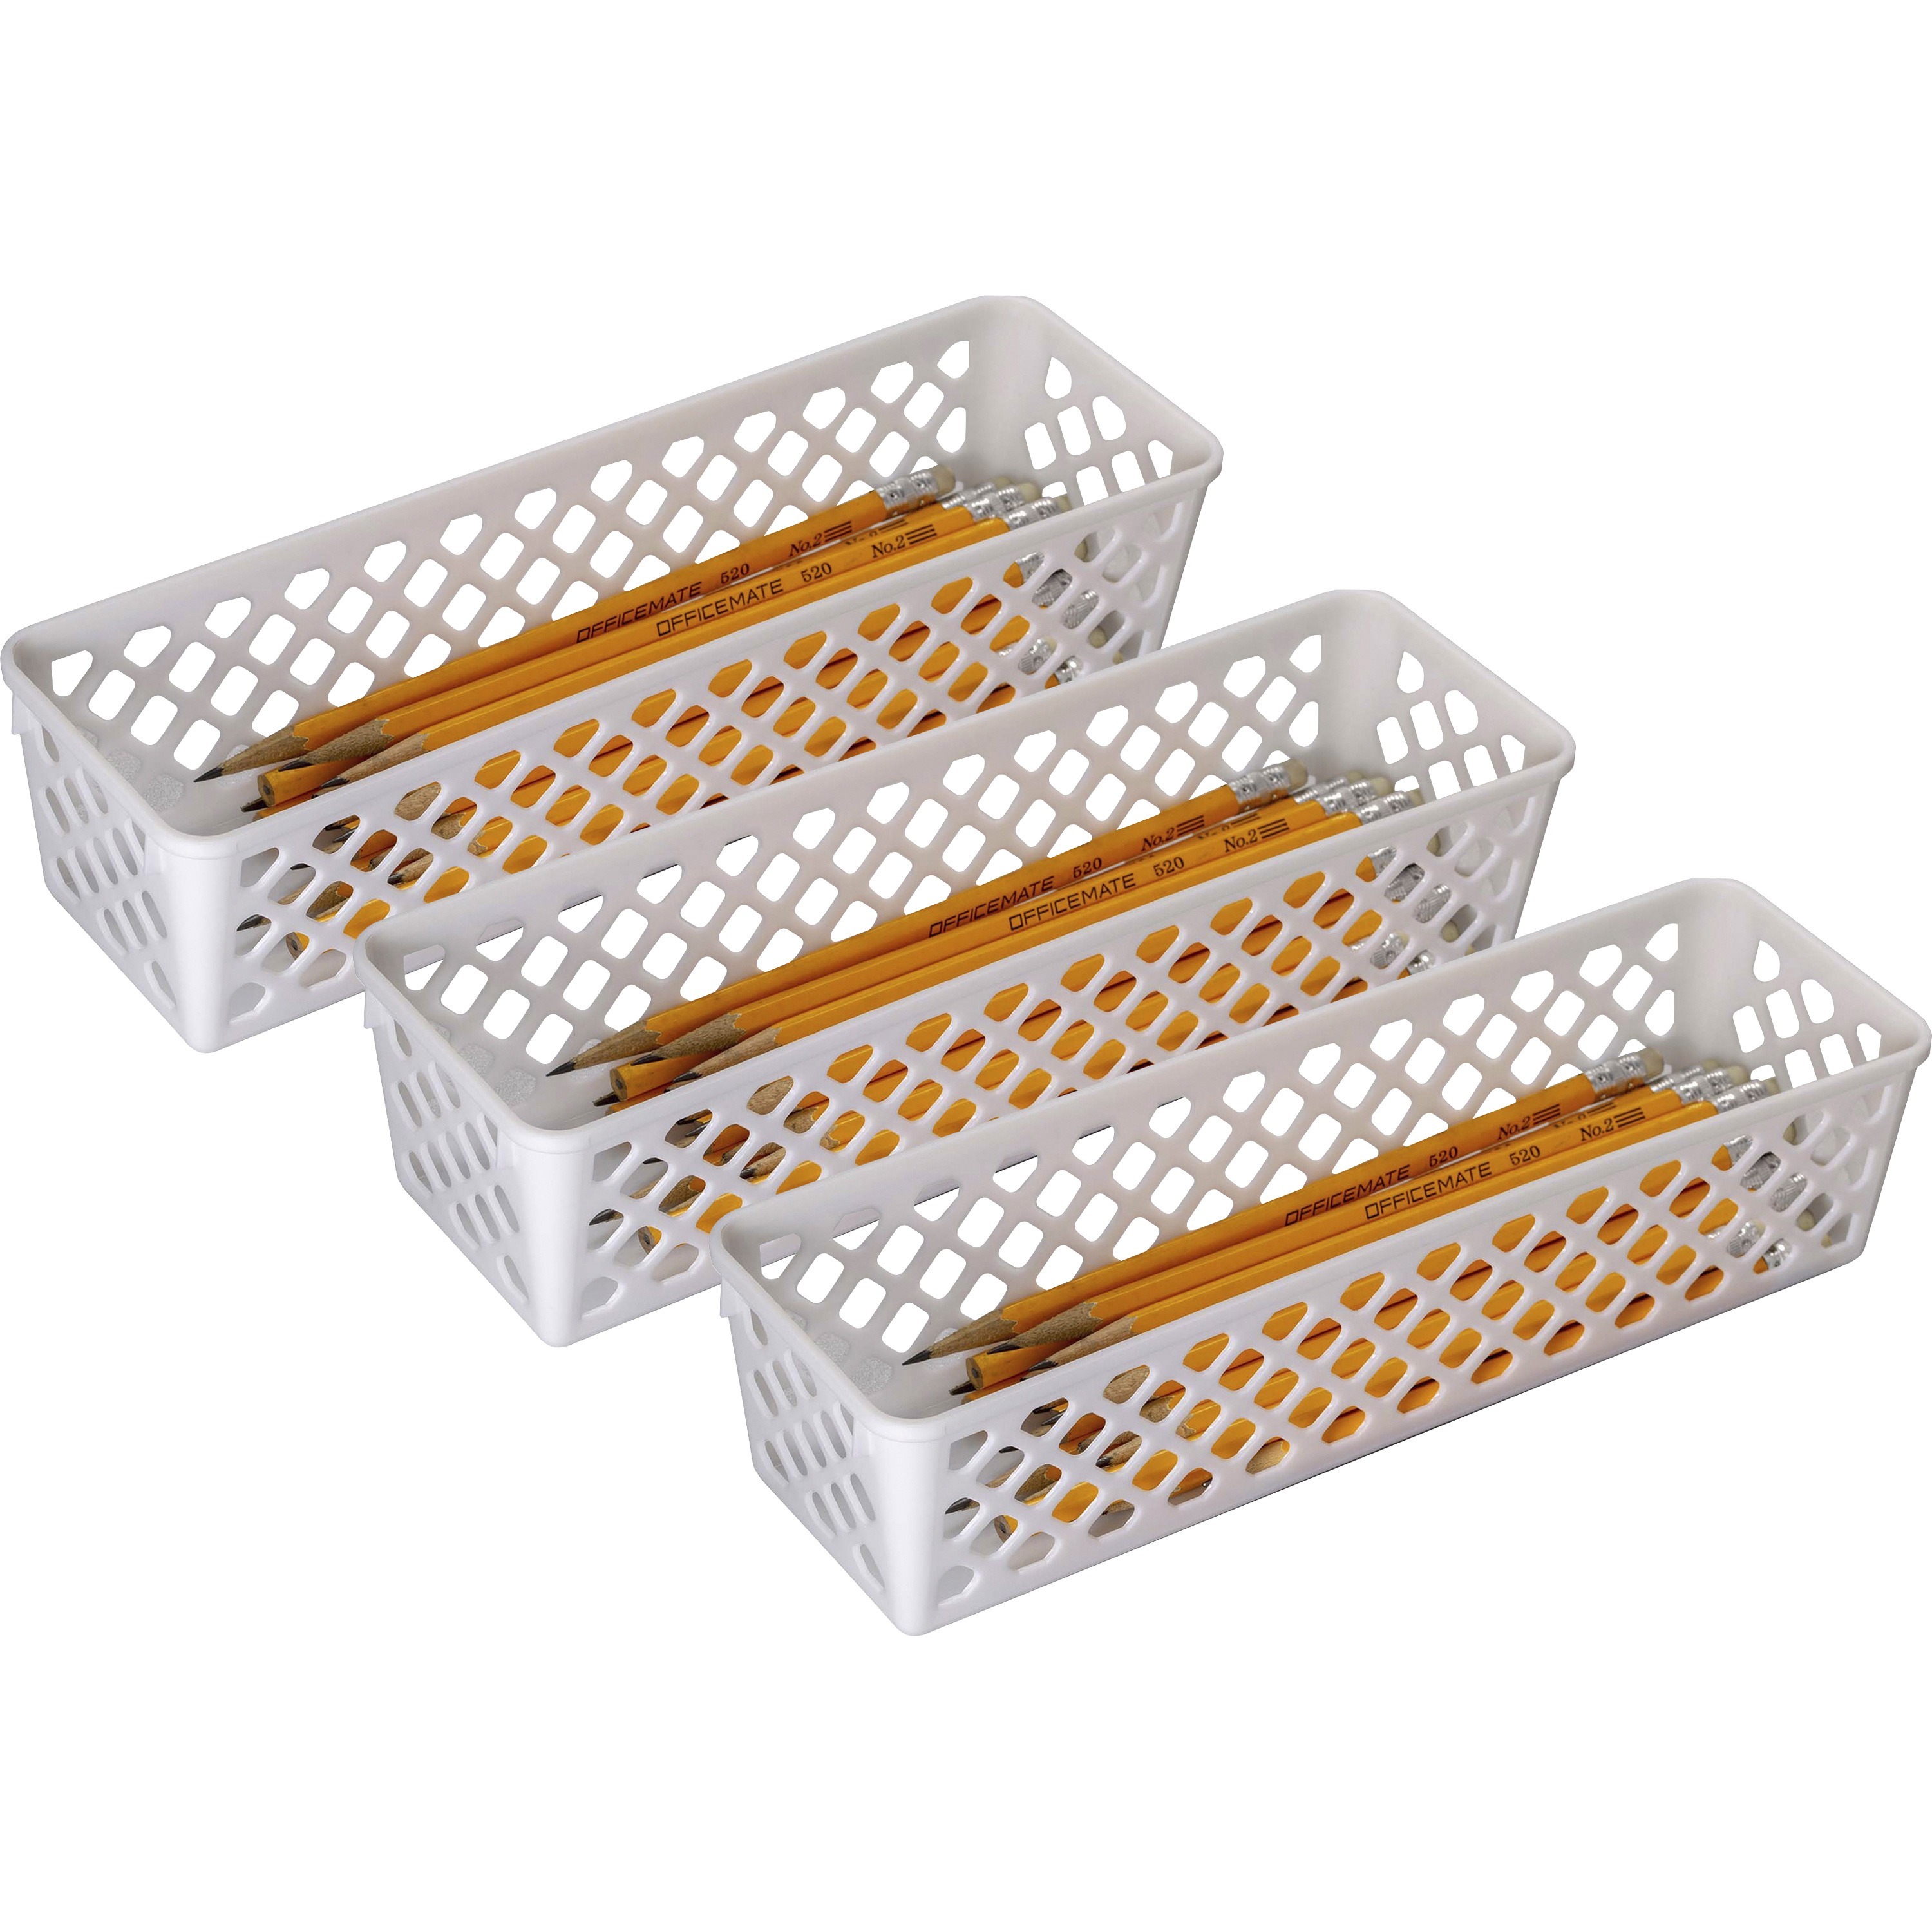  OIC® 30% Recycled Plastic Supply Baskets, Large